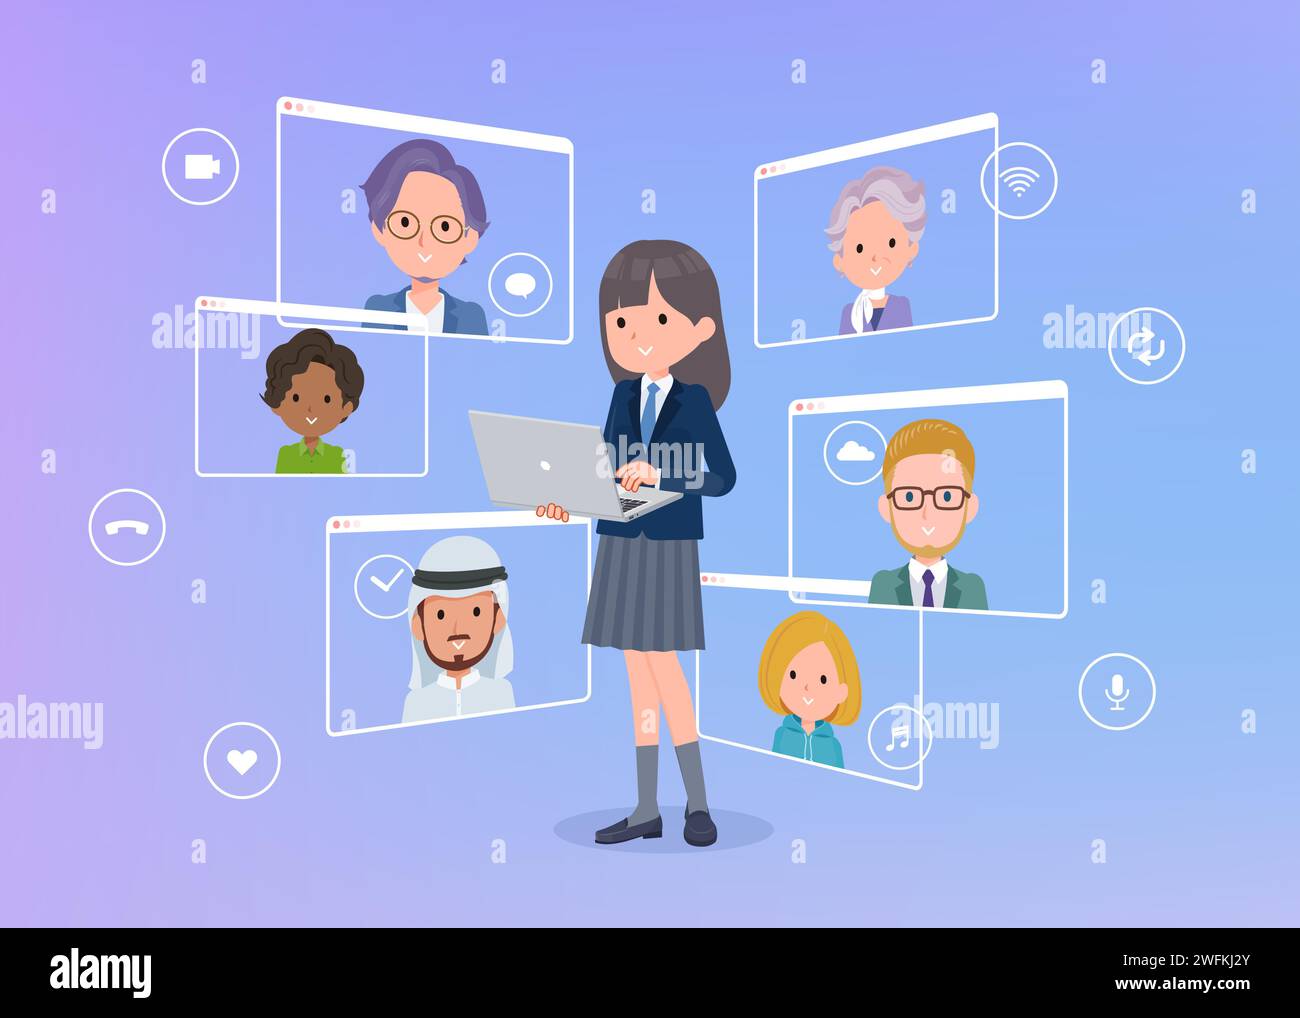 A set of navy blazer student women communicating online using a laptop.It's vector art so easy to edit. Stock Vector